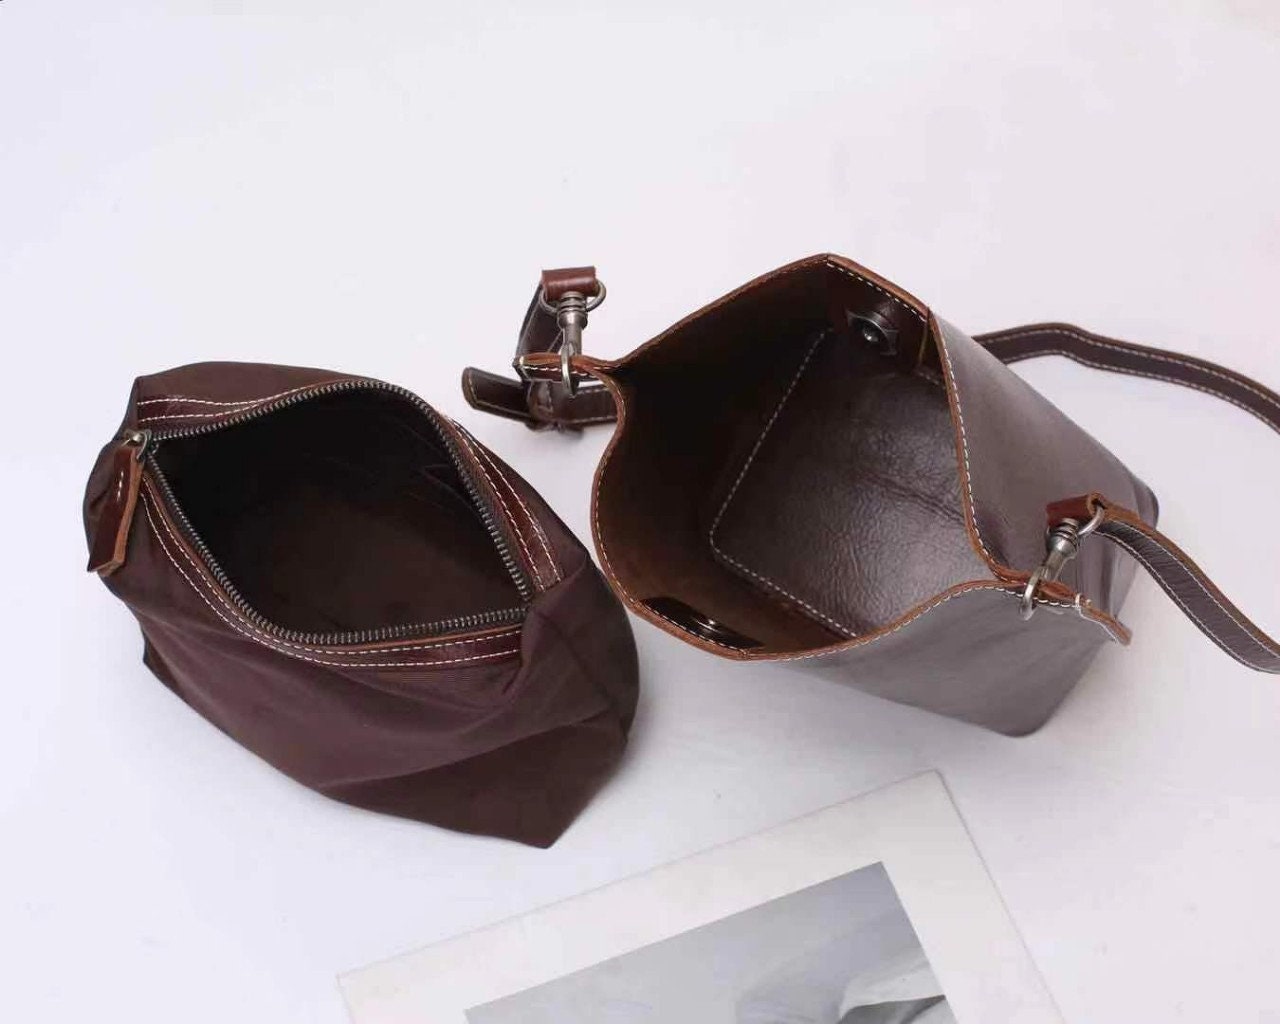 Women Leather Bucket Bag, Handcrafted Leather Shoulder Bag, Bucket Bag Women, 100% Cowhide Leather